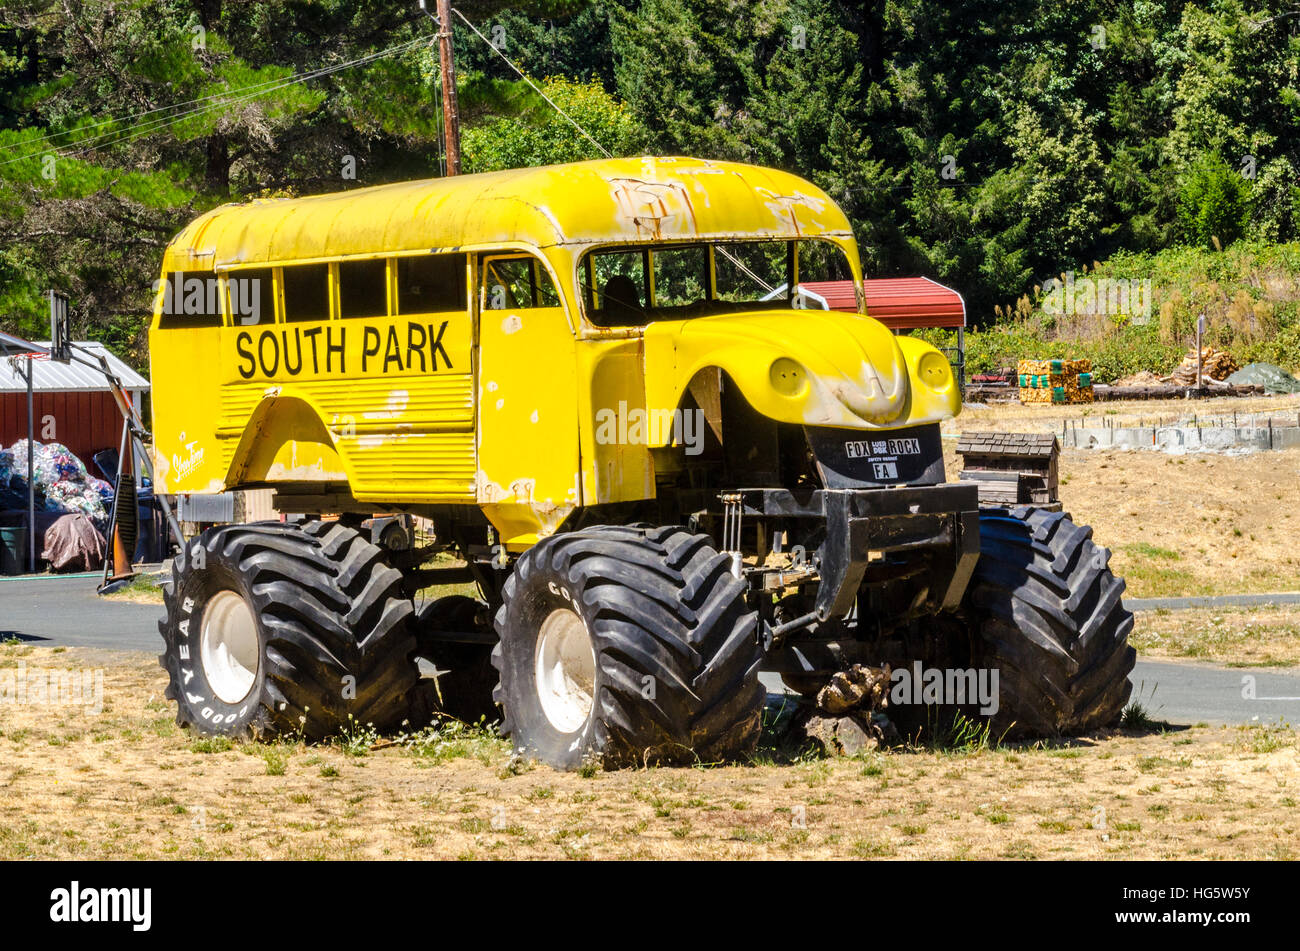 - photography bus and hi-res stock Alamy Monster images